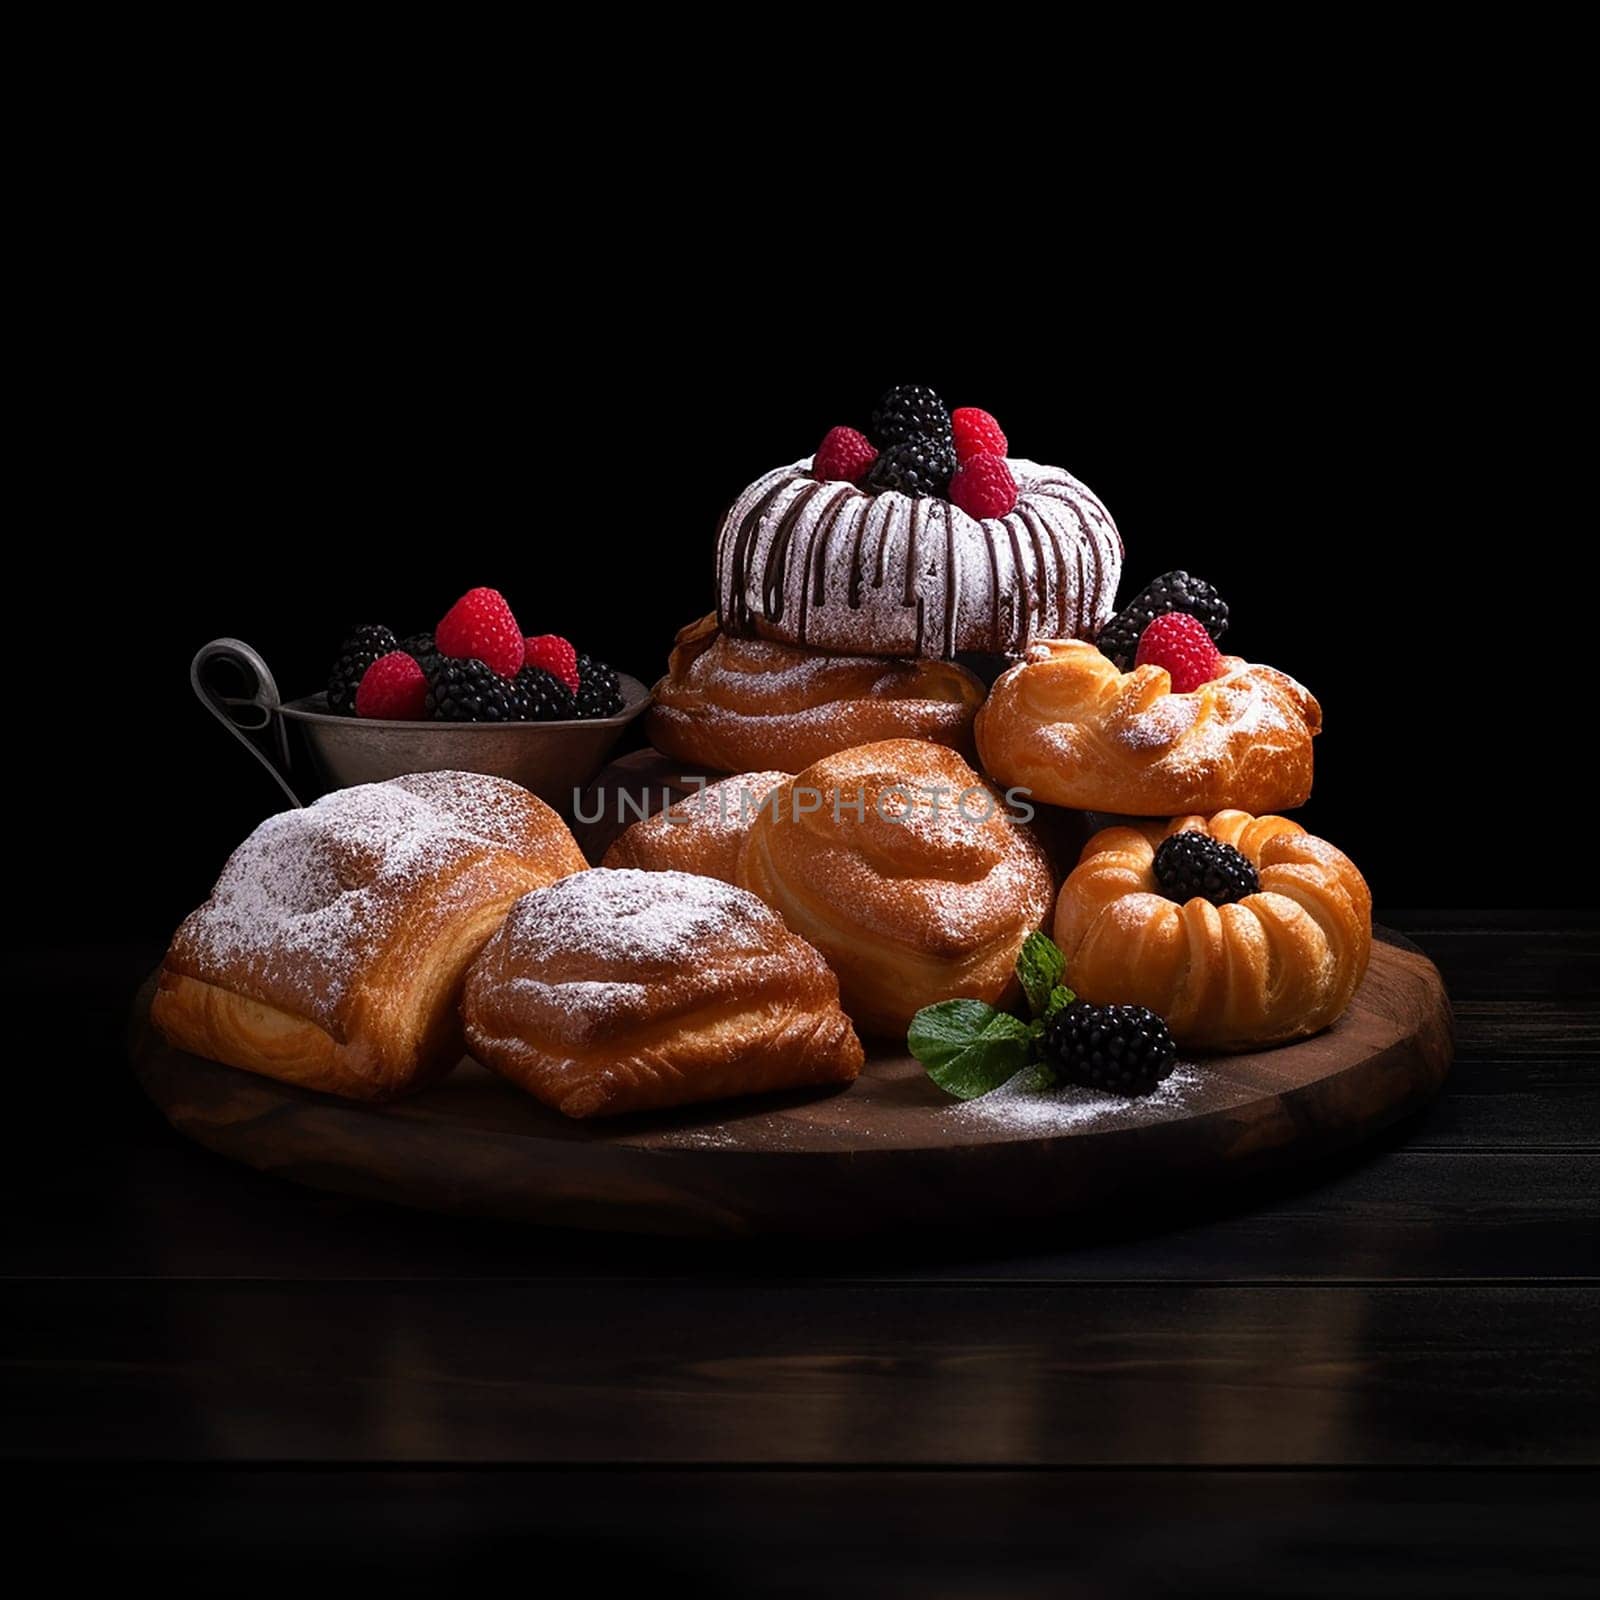 Assortment of baked goods with berries on a dark background